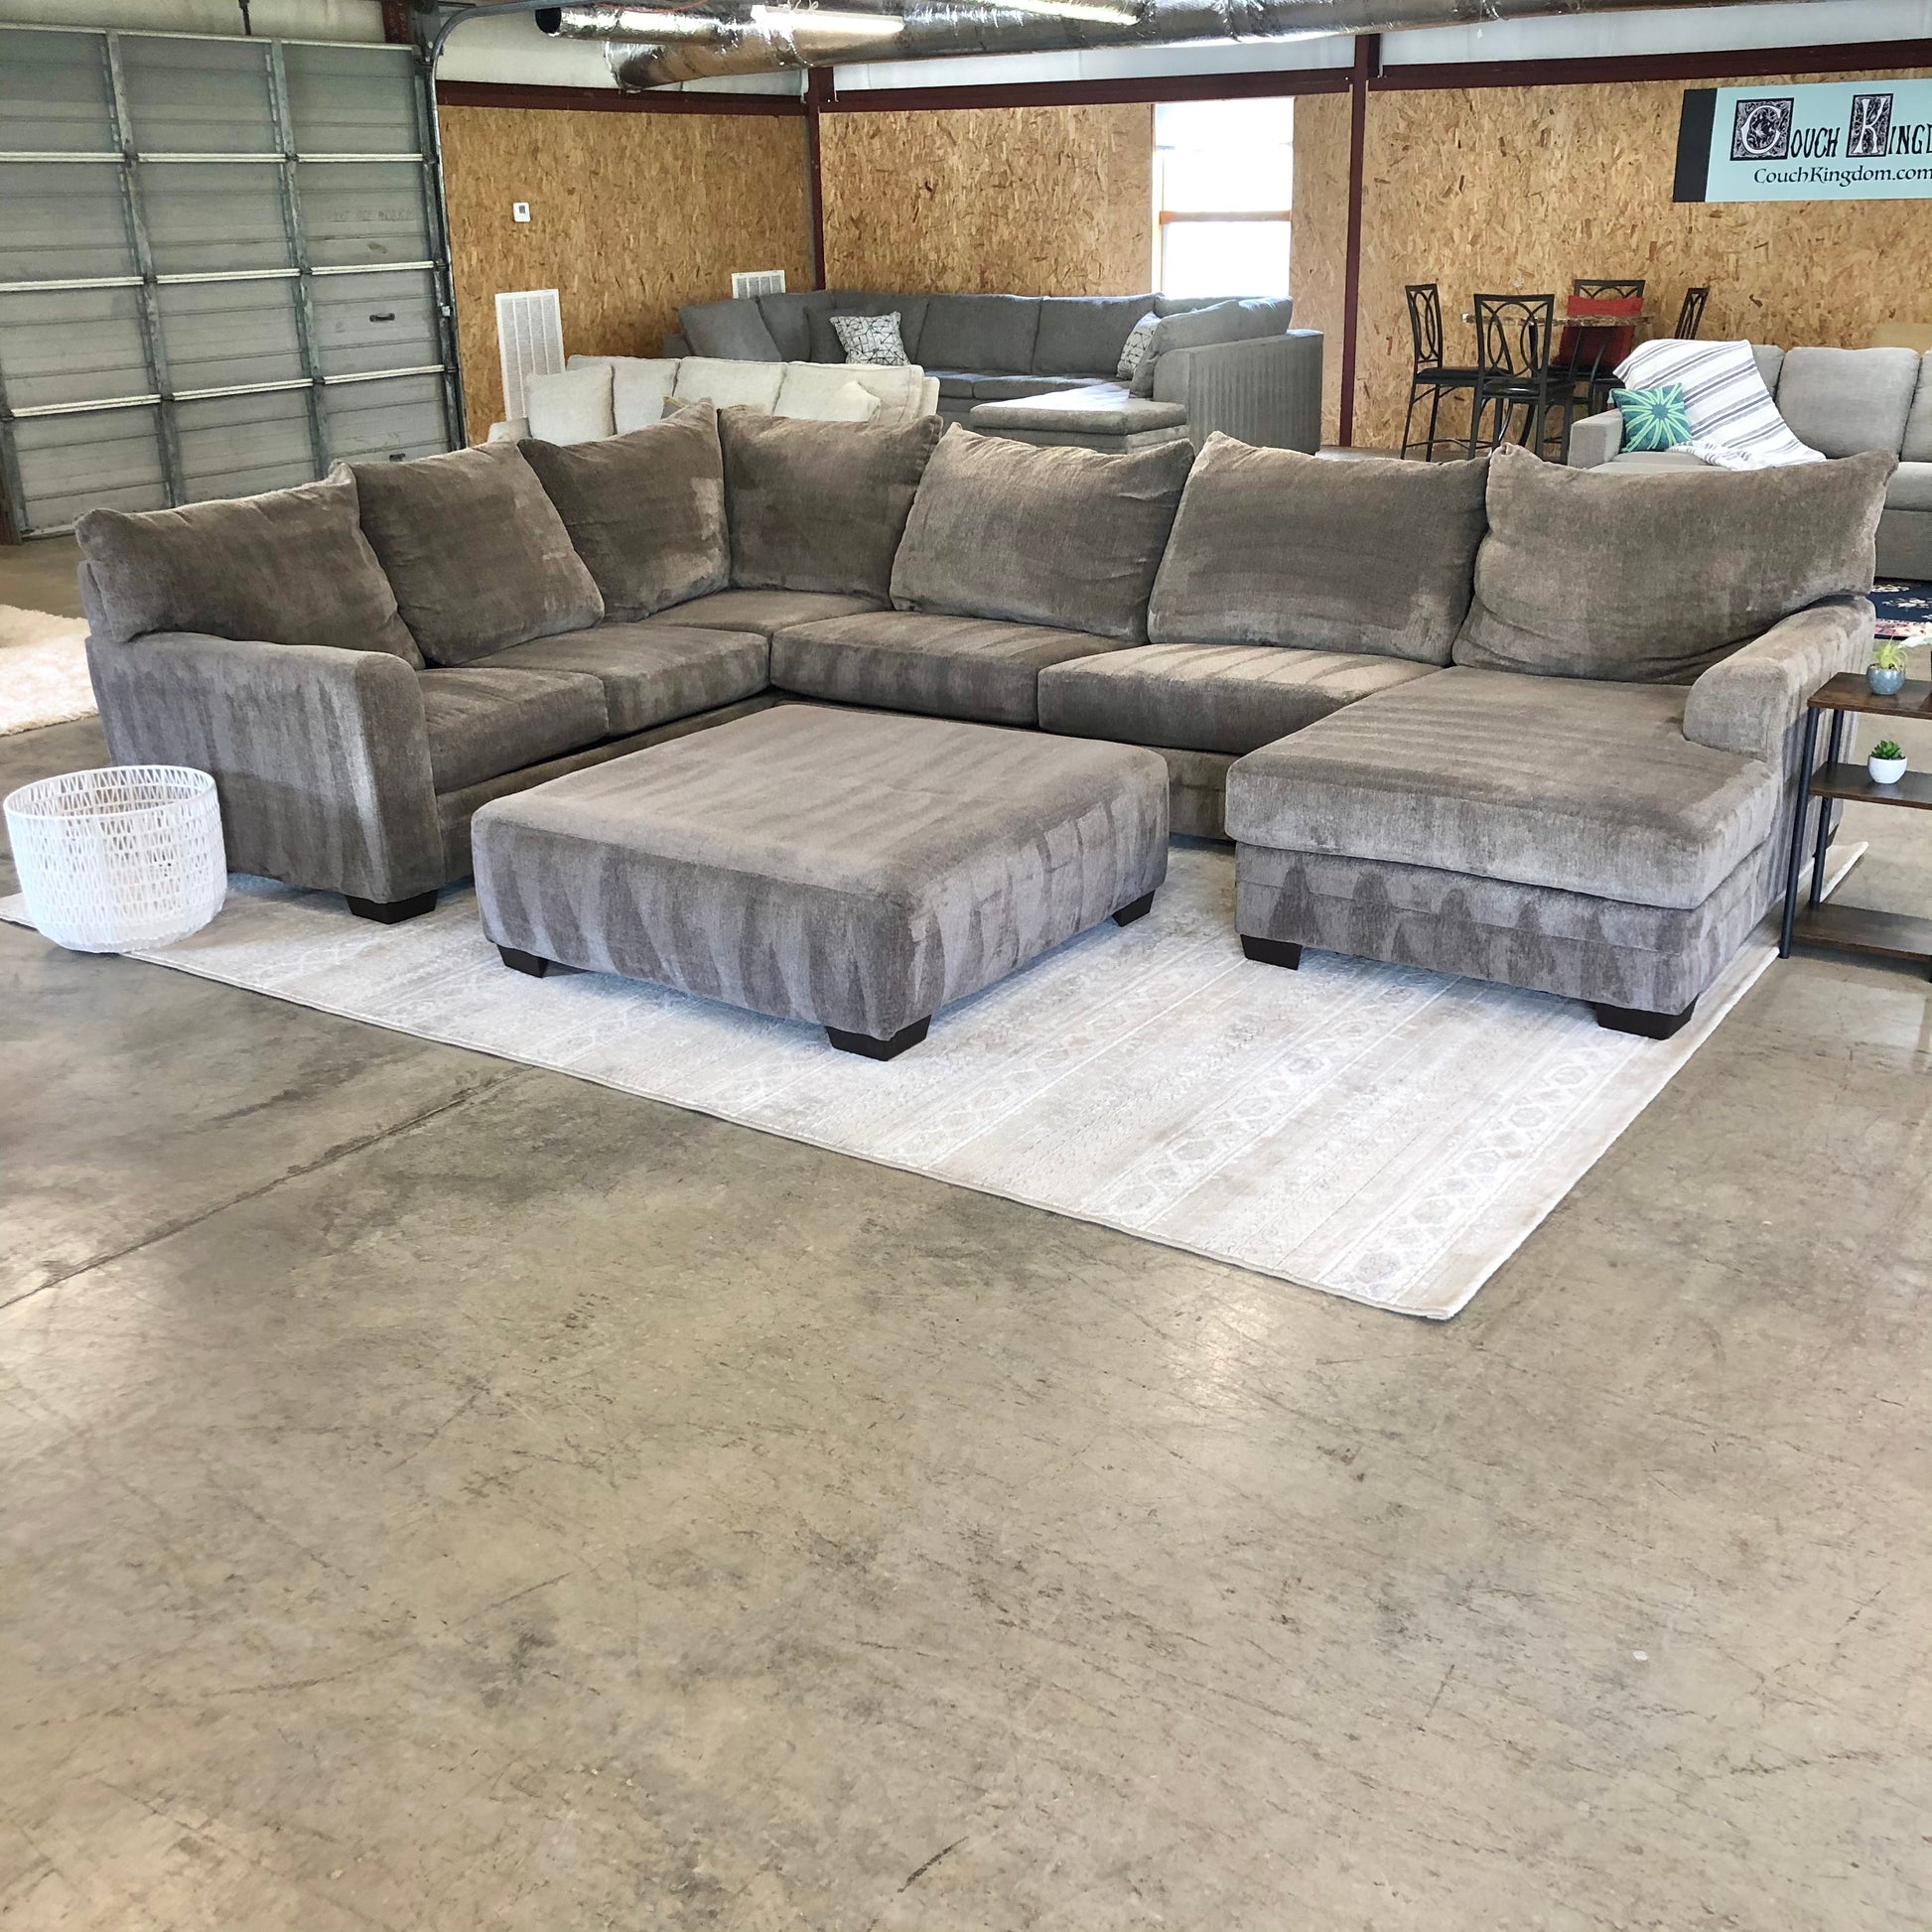 Massive 3 Piece Sectional With Giant